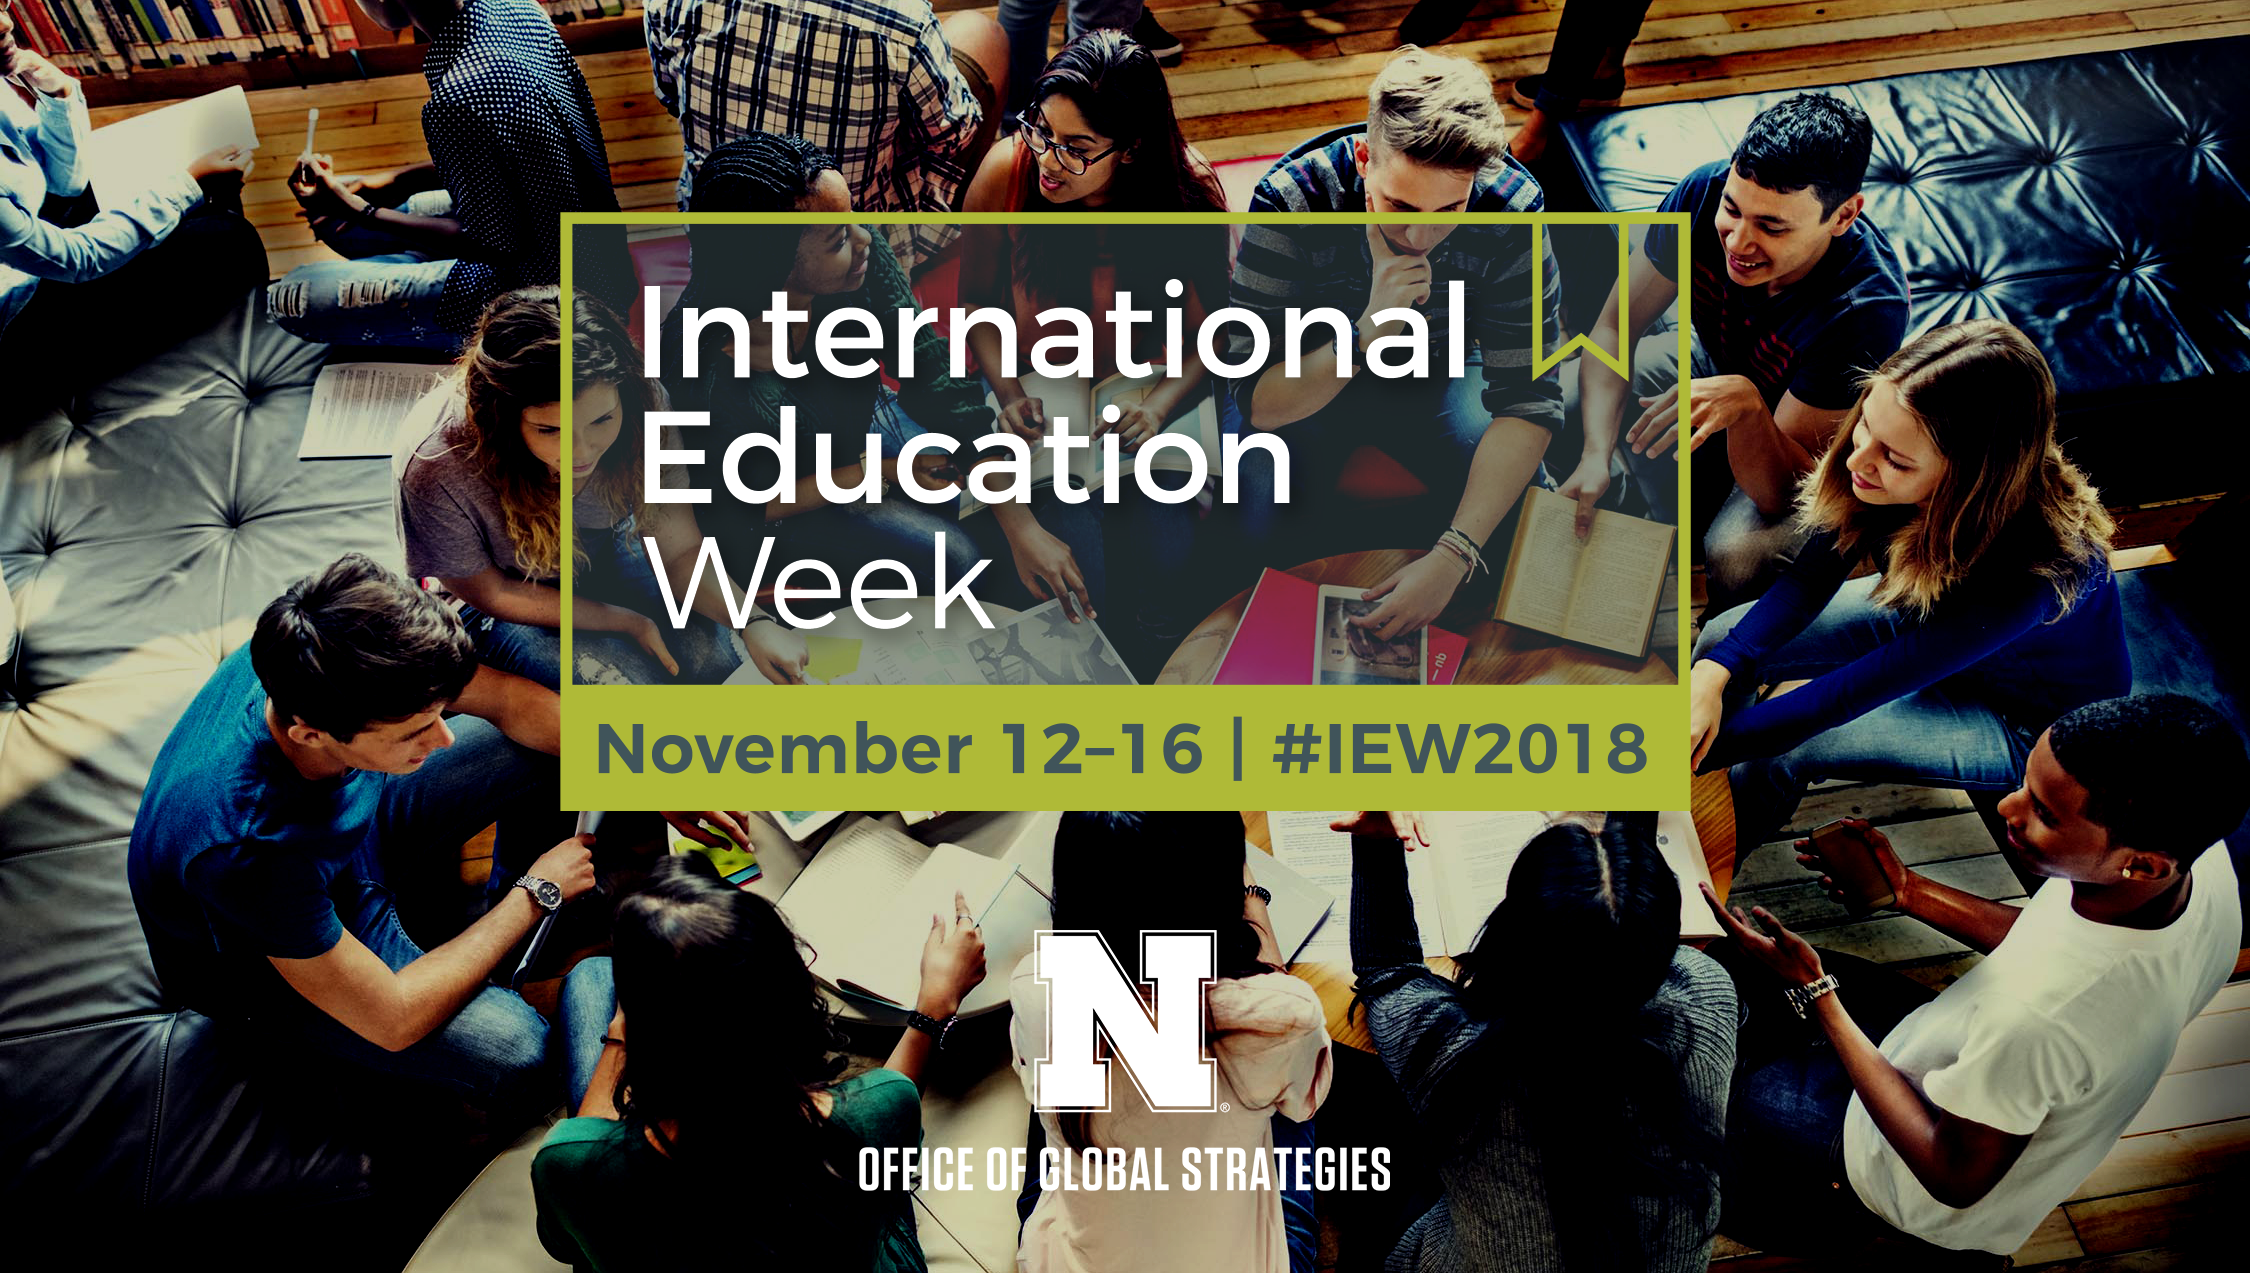 International Education Week (IEW) is a joint initiative of the U.S. Departments of State and Education to celebrate the benefits of international education and prepare Americans for a global environment during the week of November 12-16.